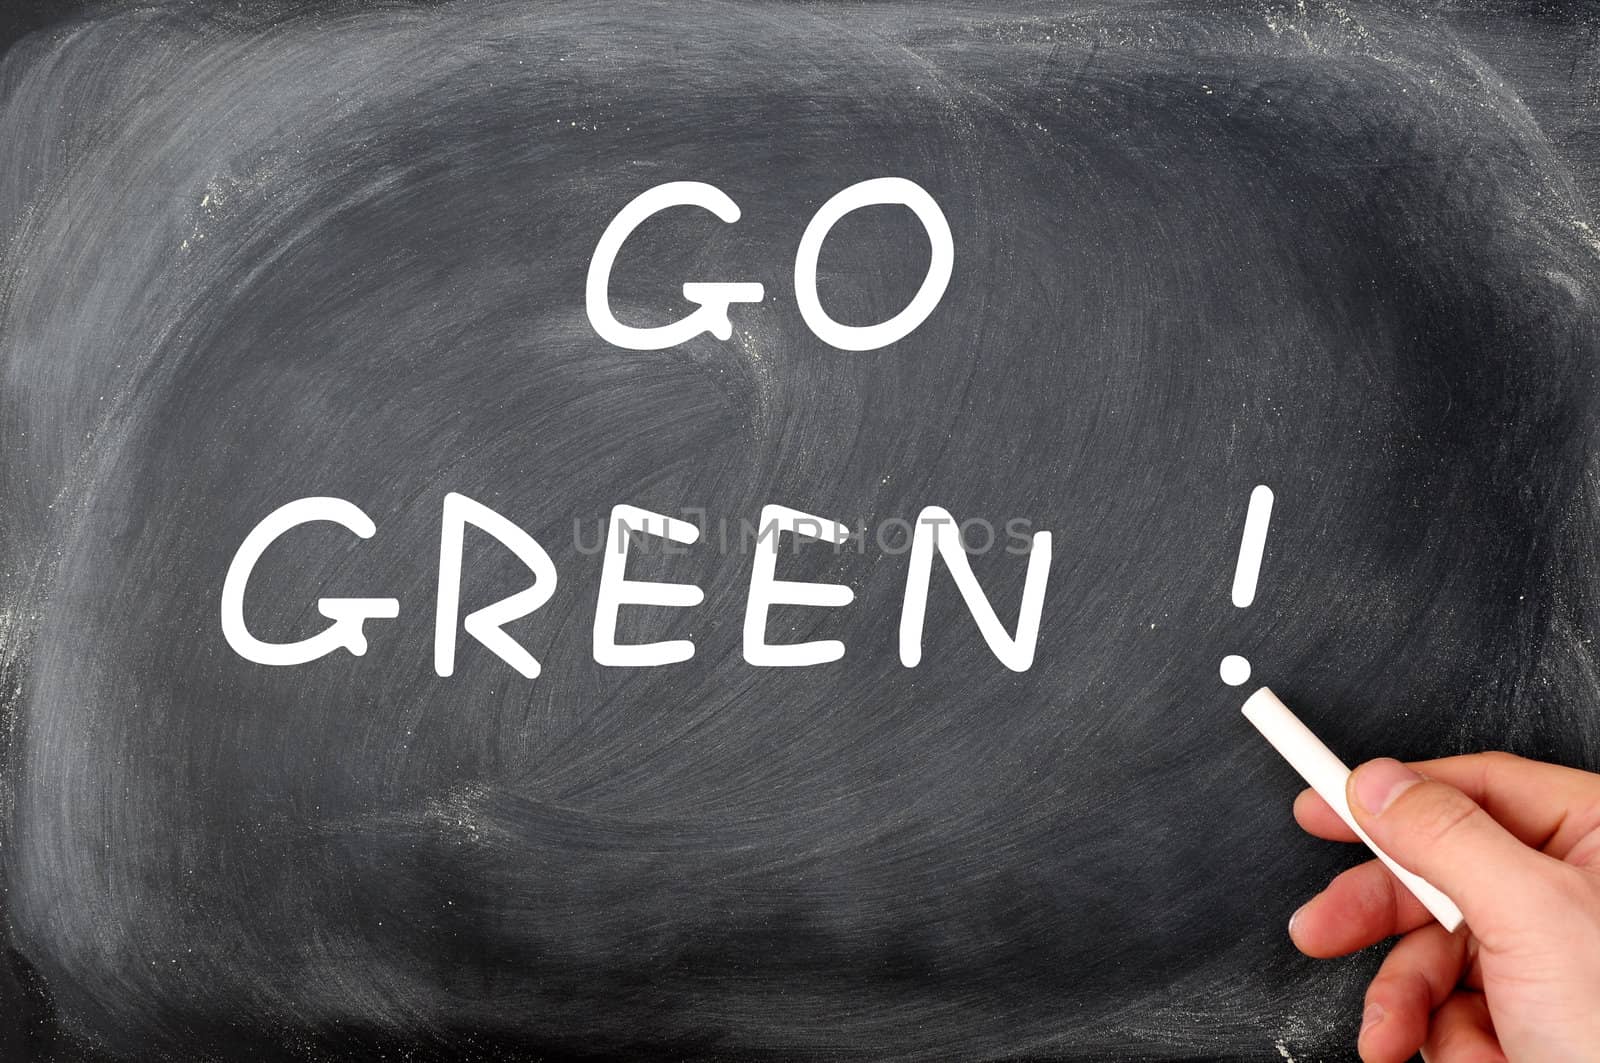 "Go Green" written on a smudged chalkboard background by bbbar